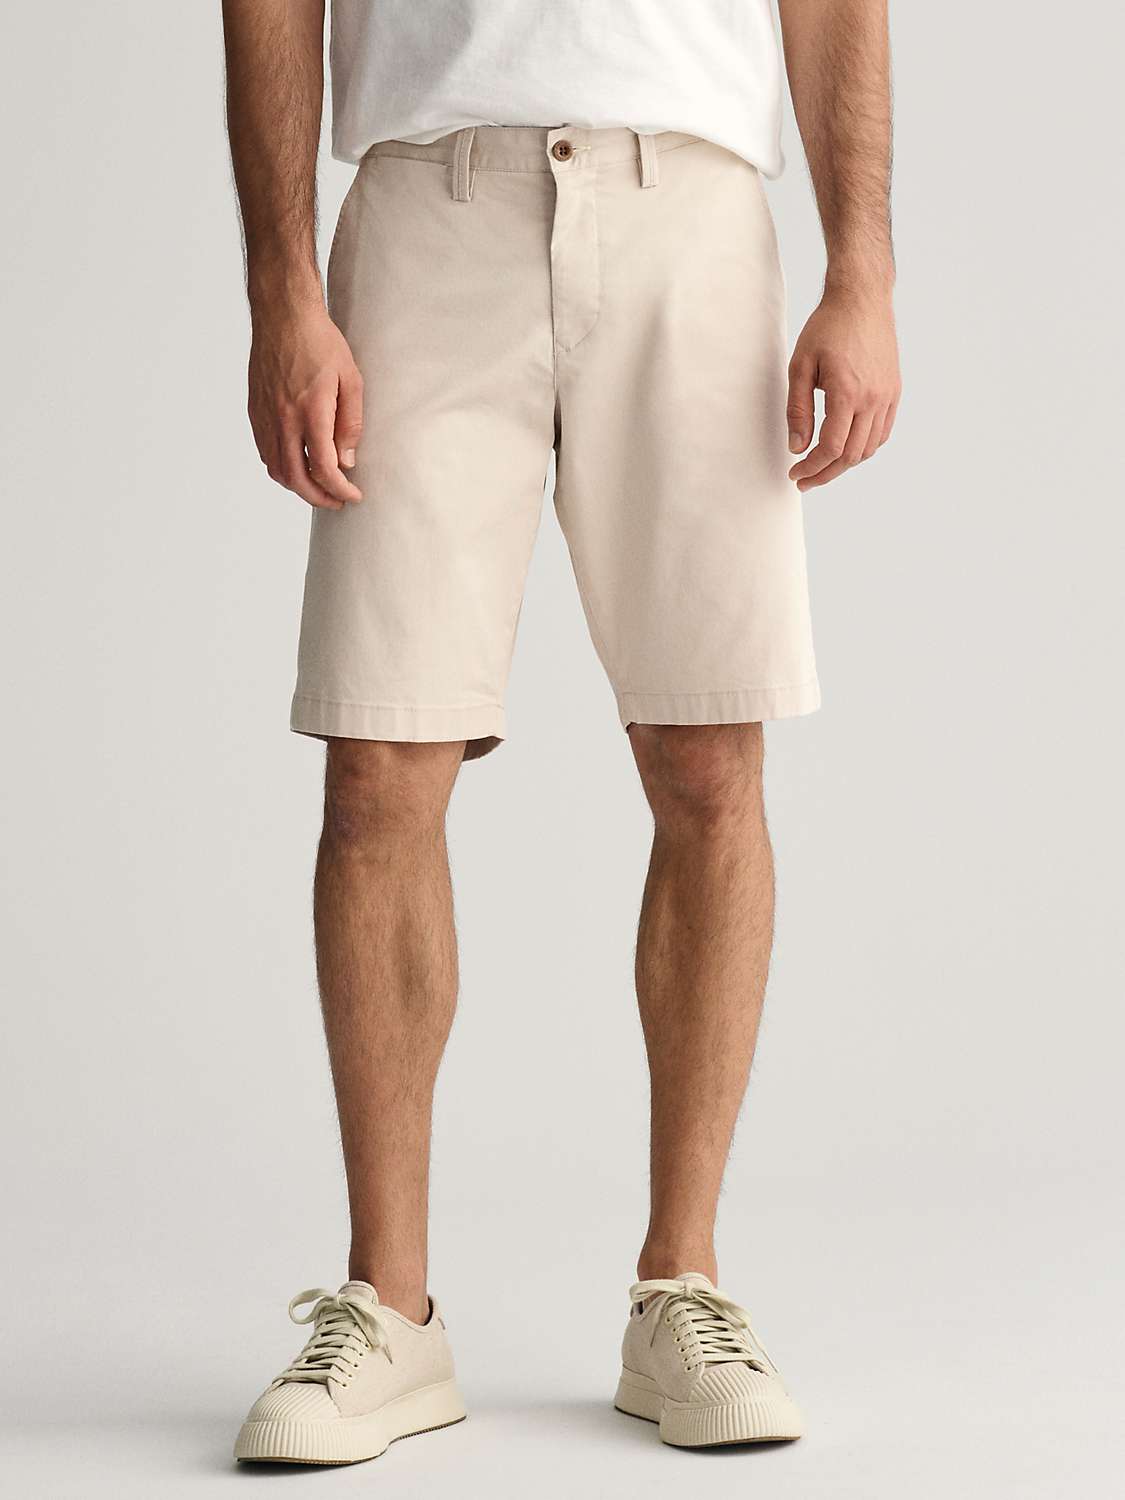 Buy GANT Relaxed Twill Shorts, Putty Online at johnlewis.com